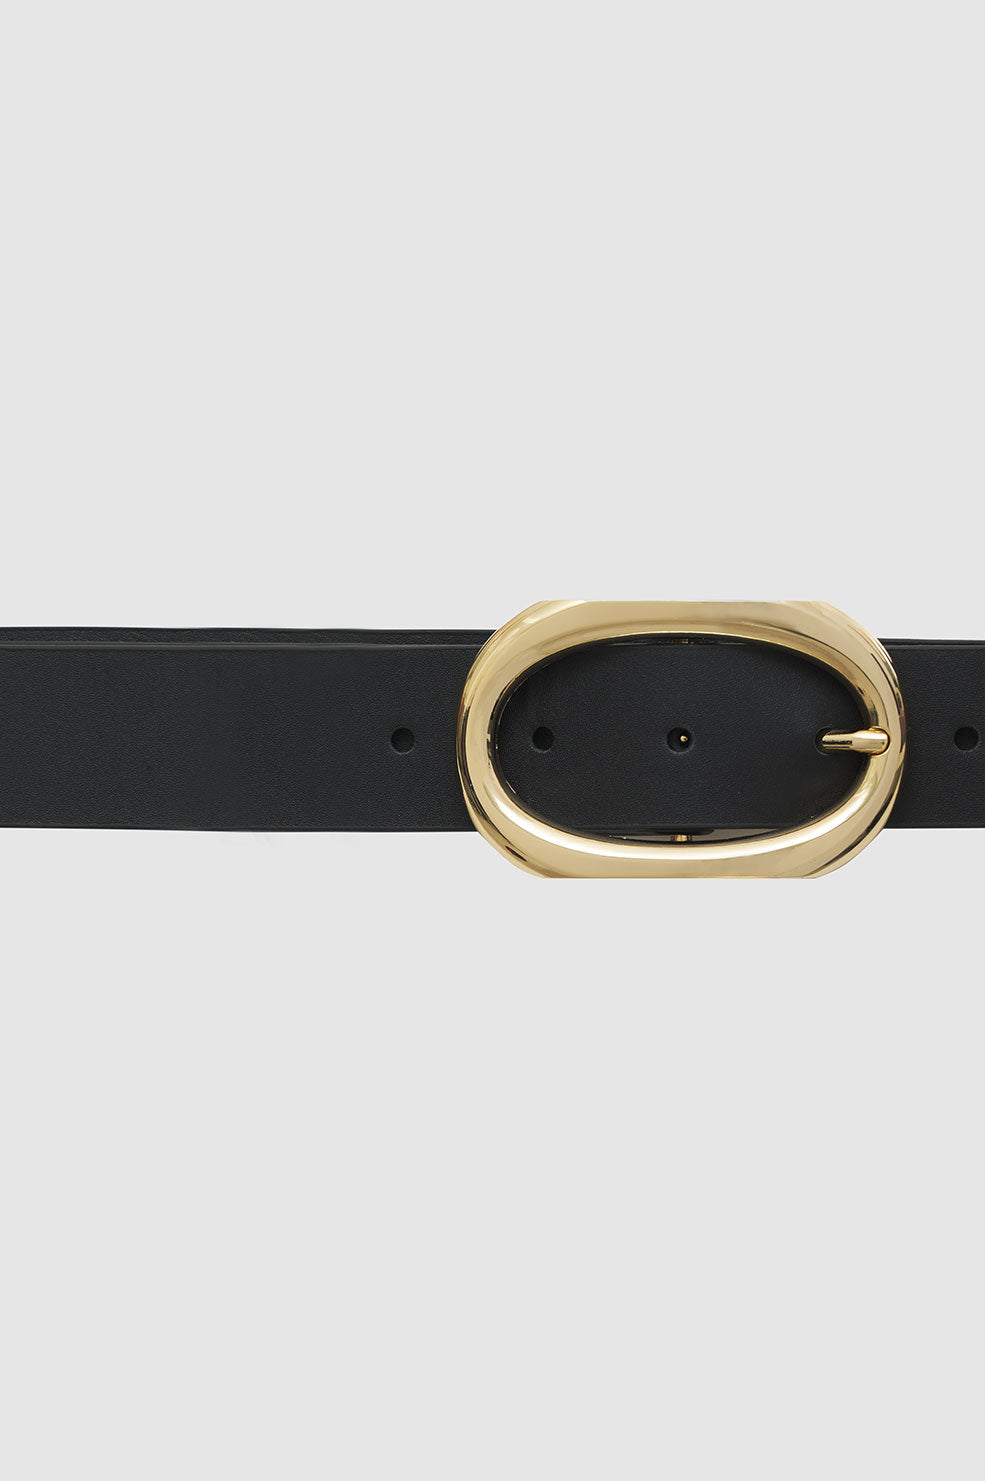 The Anine Bing Signature Link Belt in Black available at The New Trend Australia